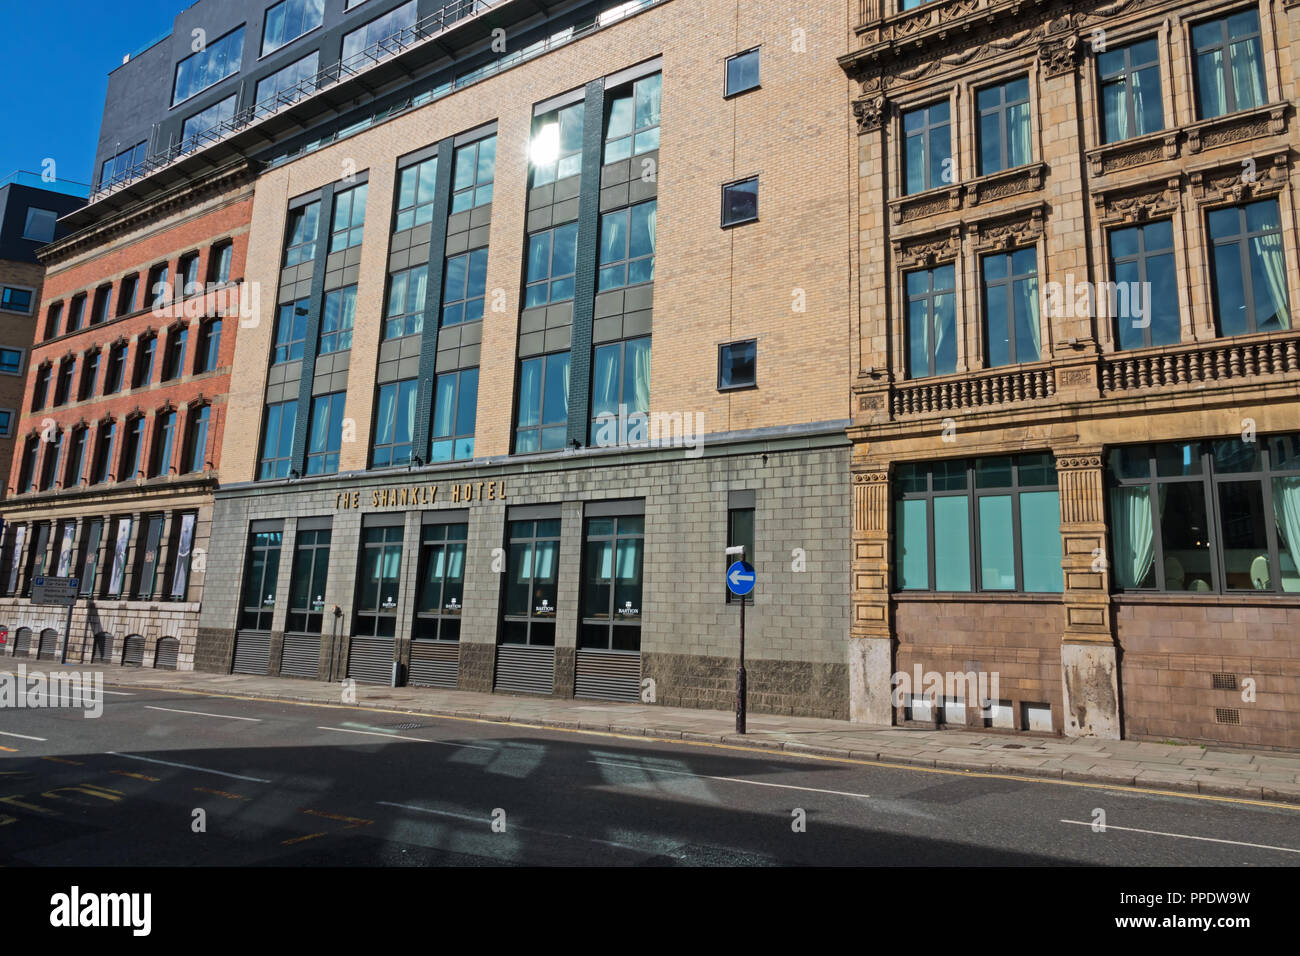 Facade of the Shankly Hotel, a luxury Bill Shankly Themed hotel on Whitechapel Liverpool UK Stock Photo